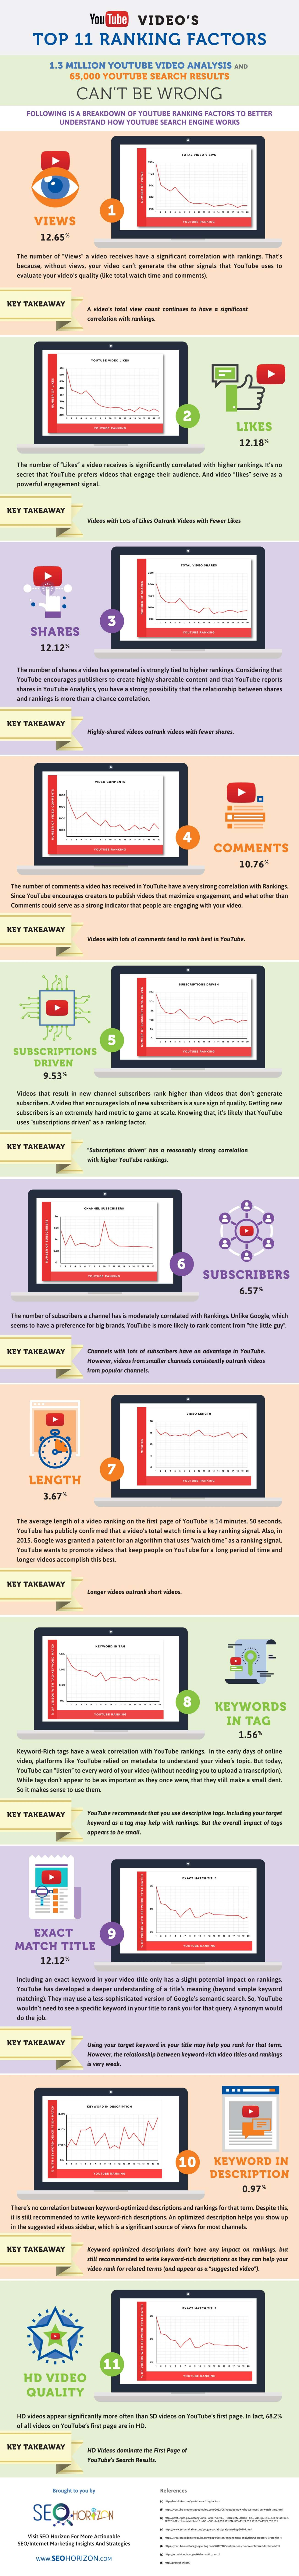 infographie-youtube-video-seo